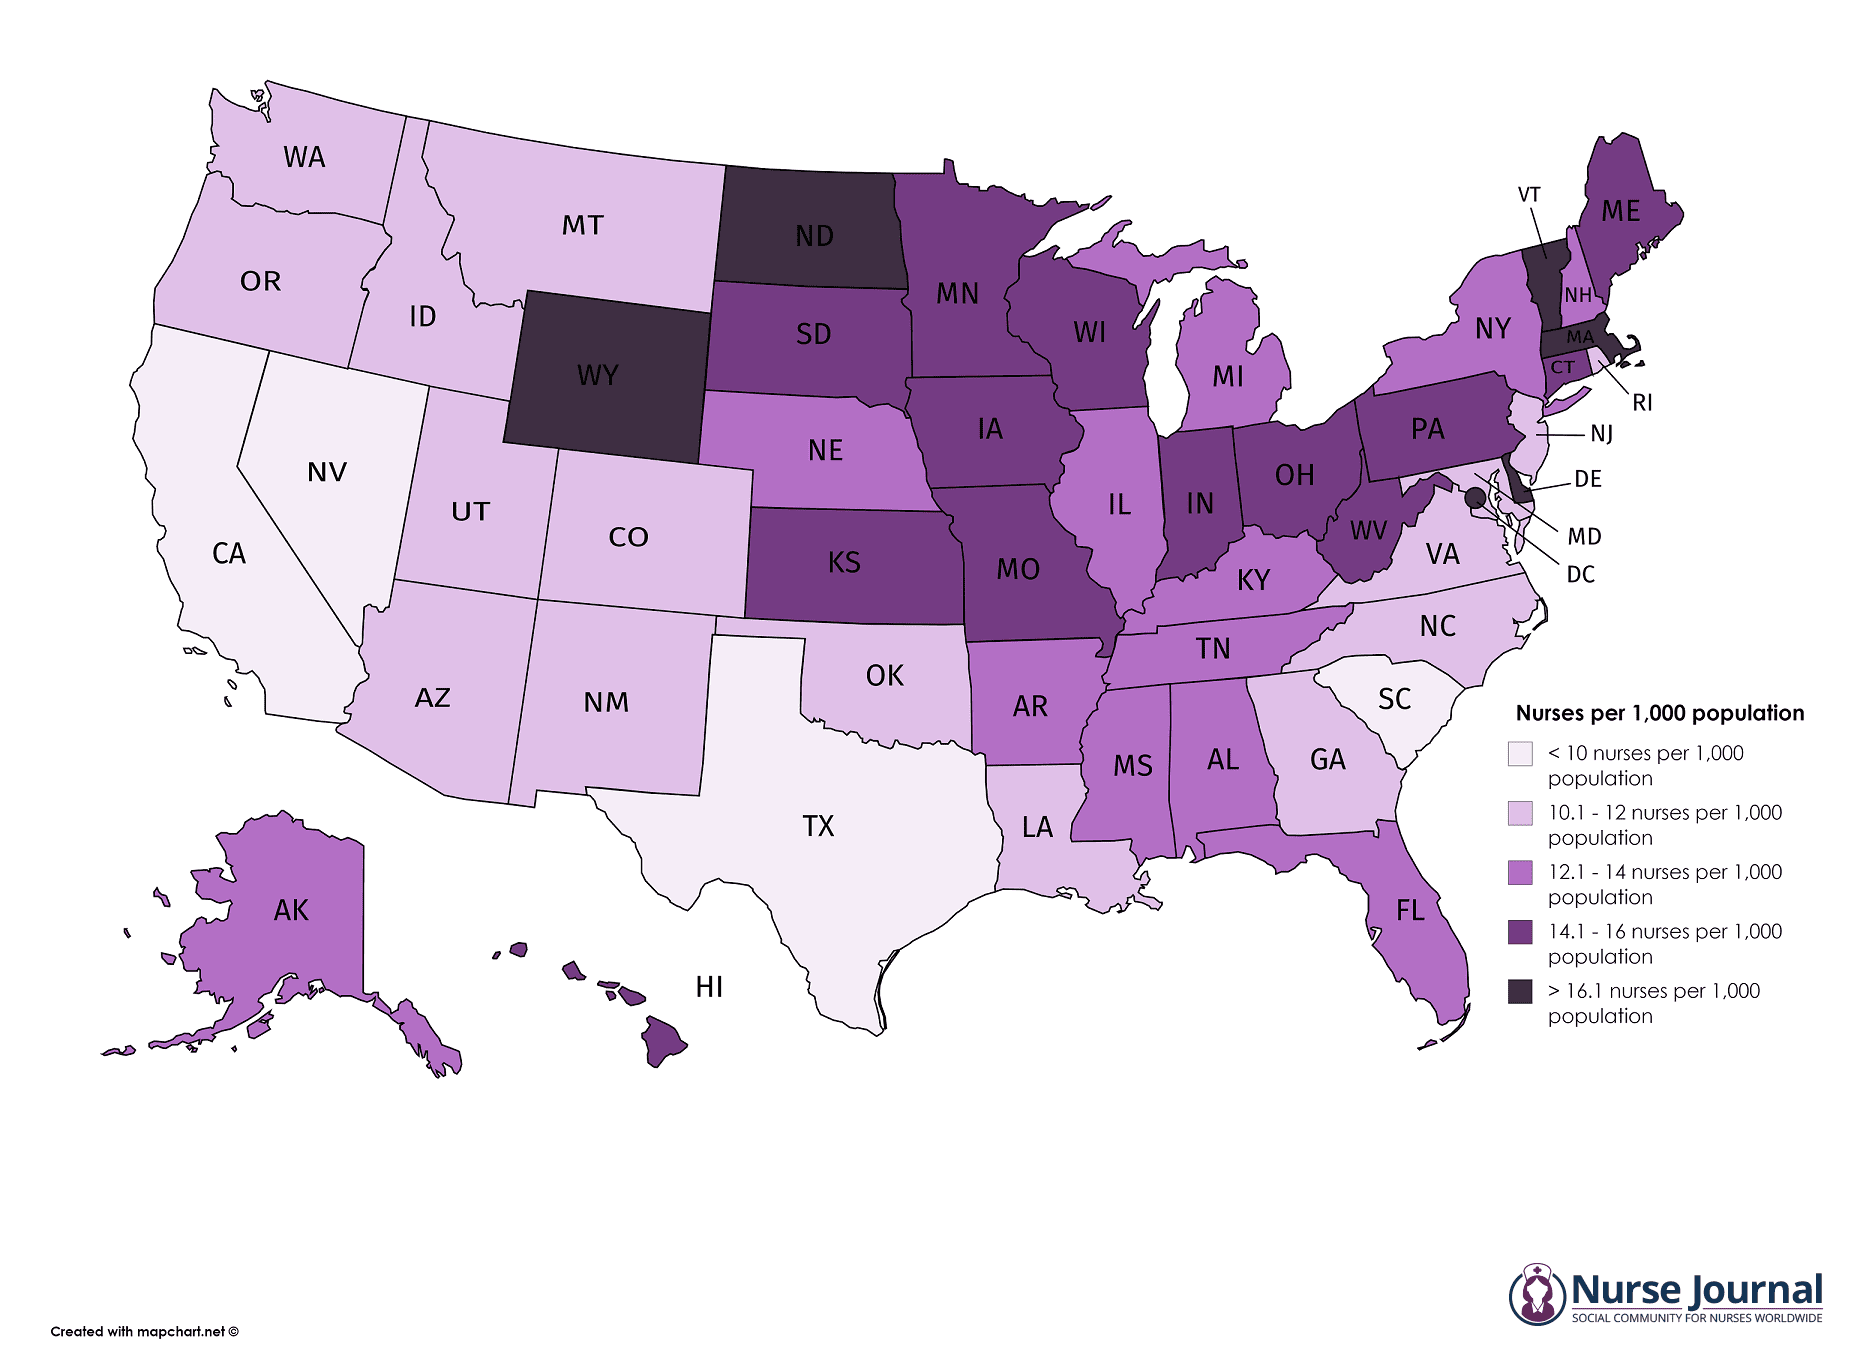 Nurses Per 1,000 Population - State-By-State